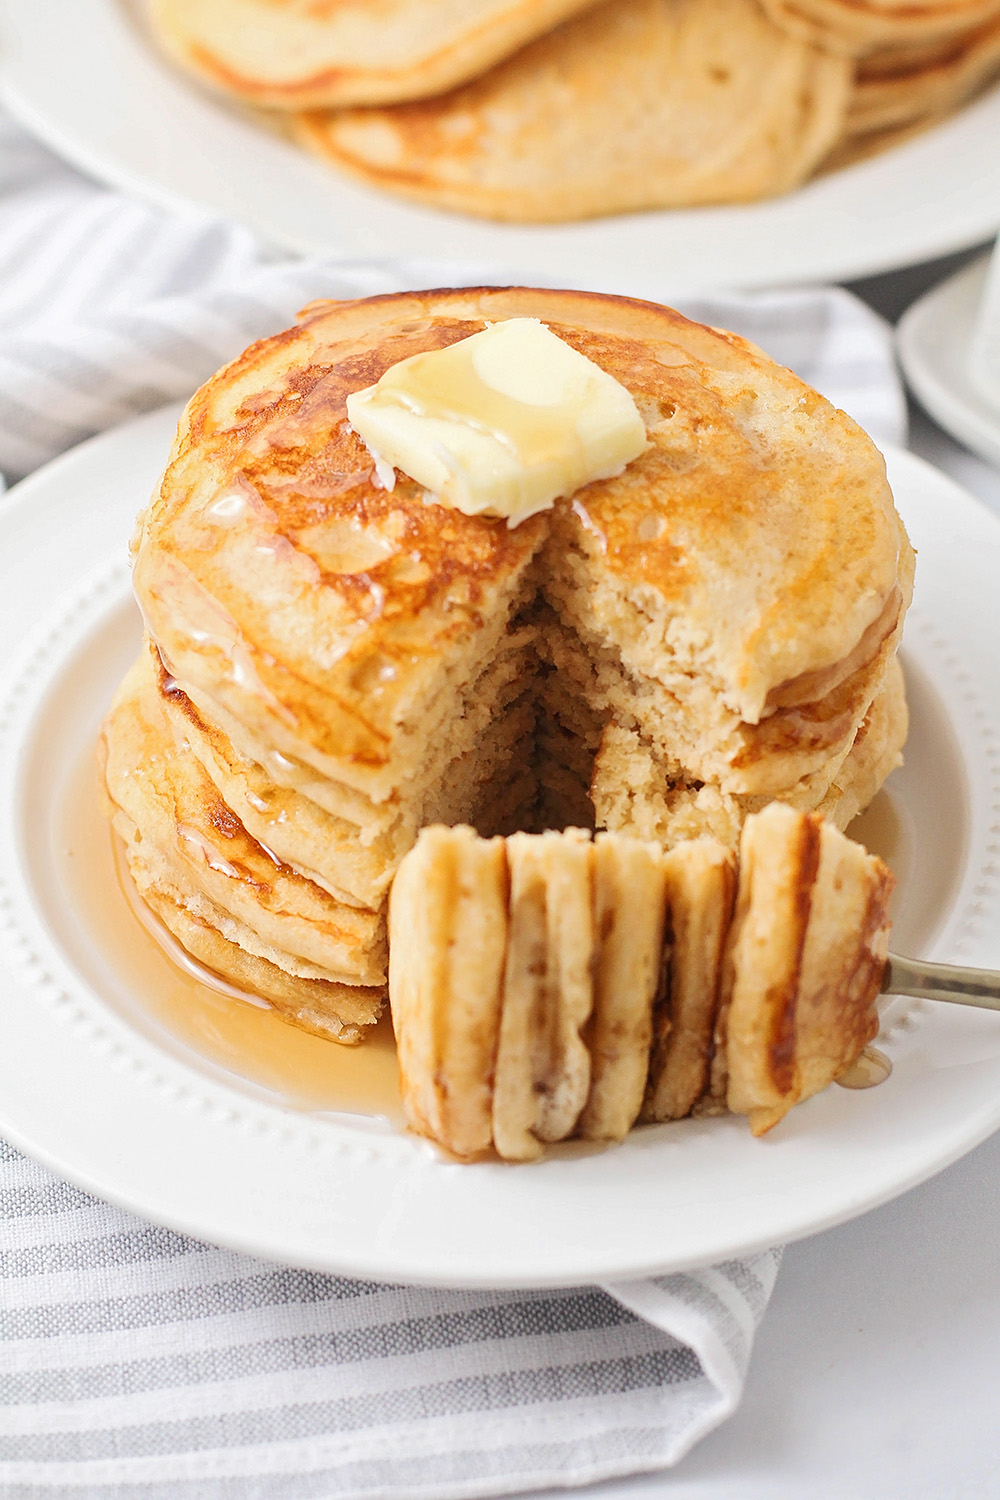 These fluffy and light whole wheat pancakes are so delicious, and quick and easy to make. They're a wholesome breakfast everyone will love!